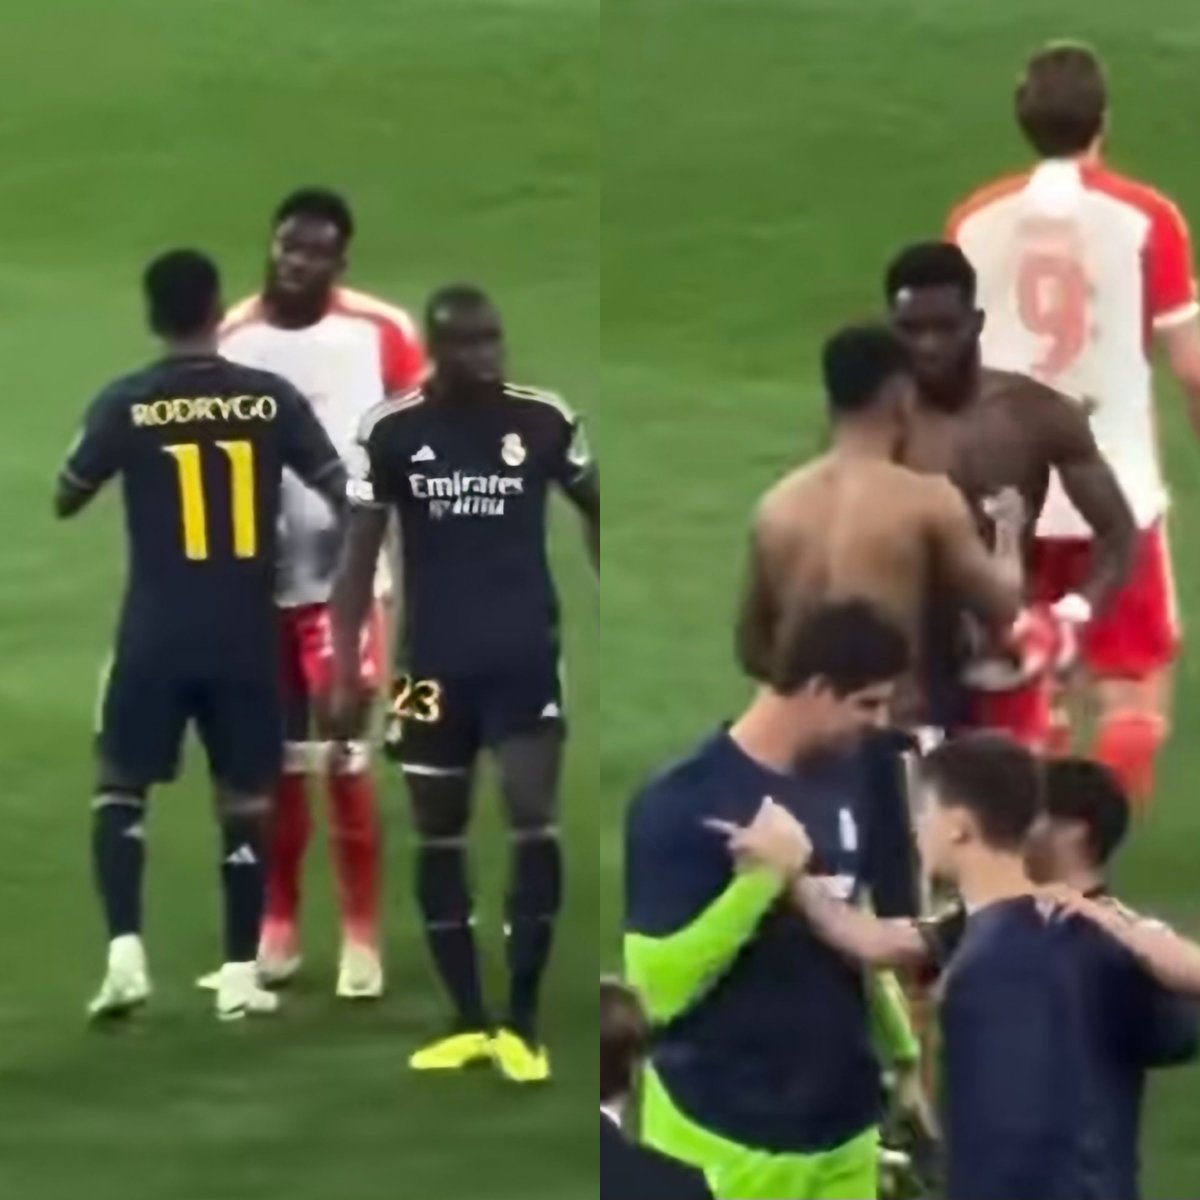 Alphonso Davies and Rodrygo exchanged shirts after the game. 🫱🏻‍🫲🏼